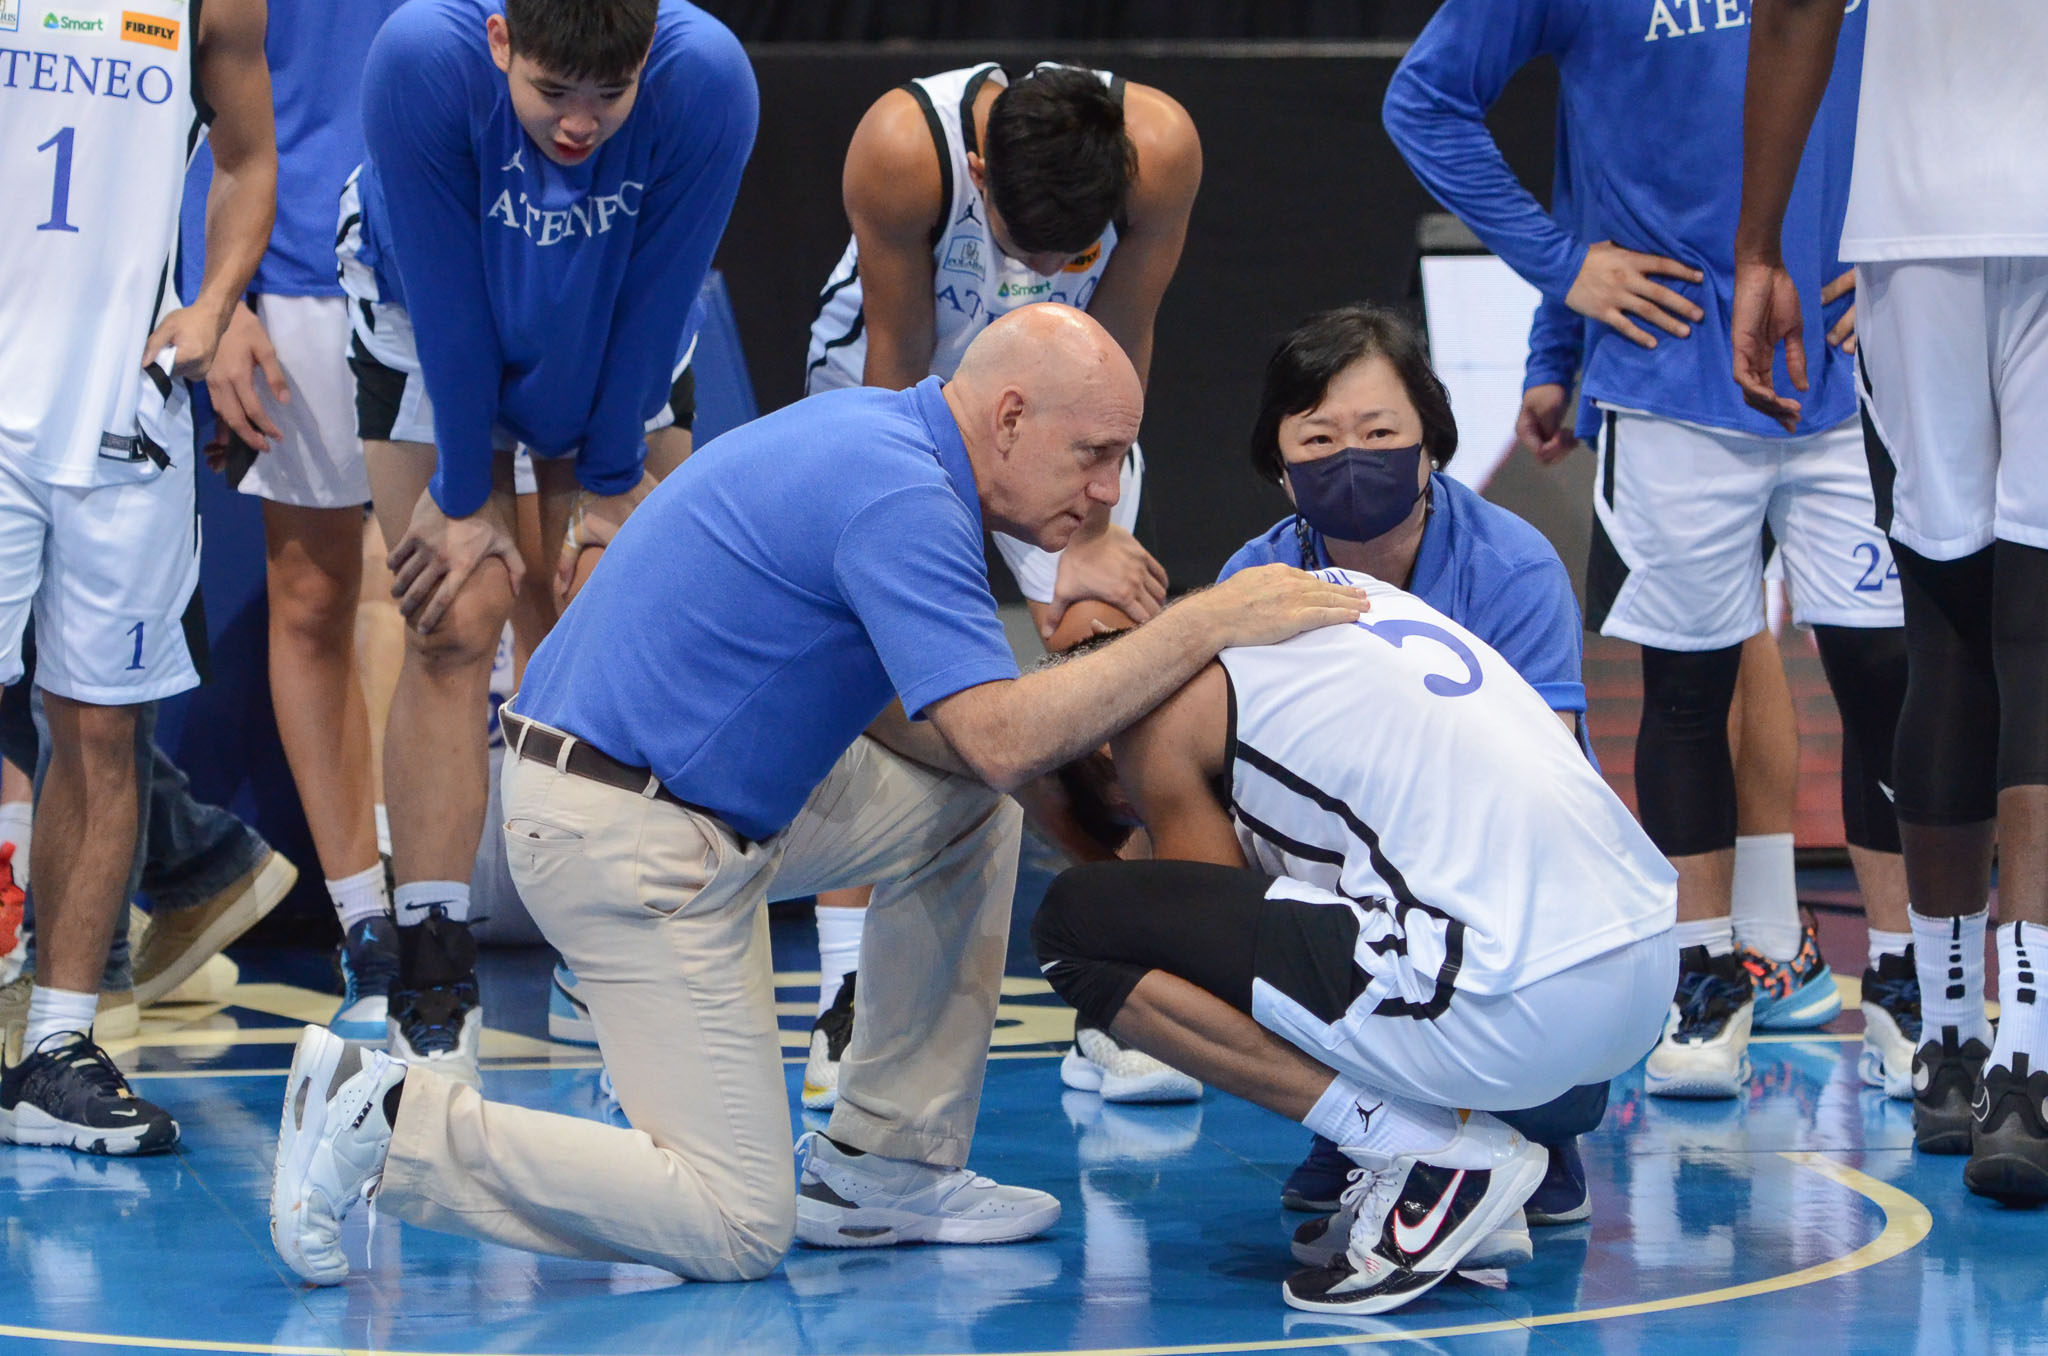 Ateneo coach Tab Baldwin comforts his players after their loss in the UAAP Finals.  UAAP PHOTO